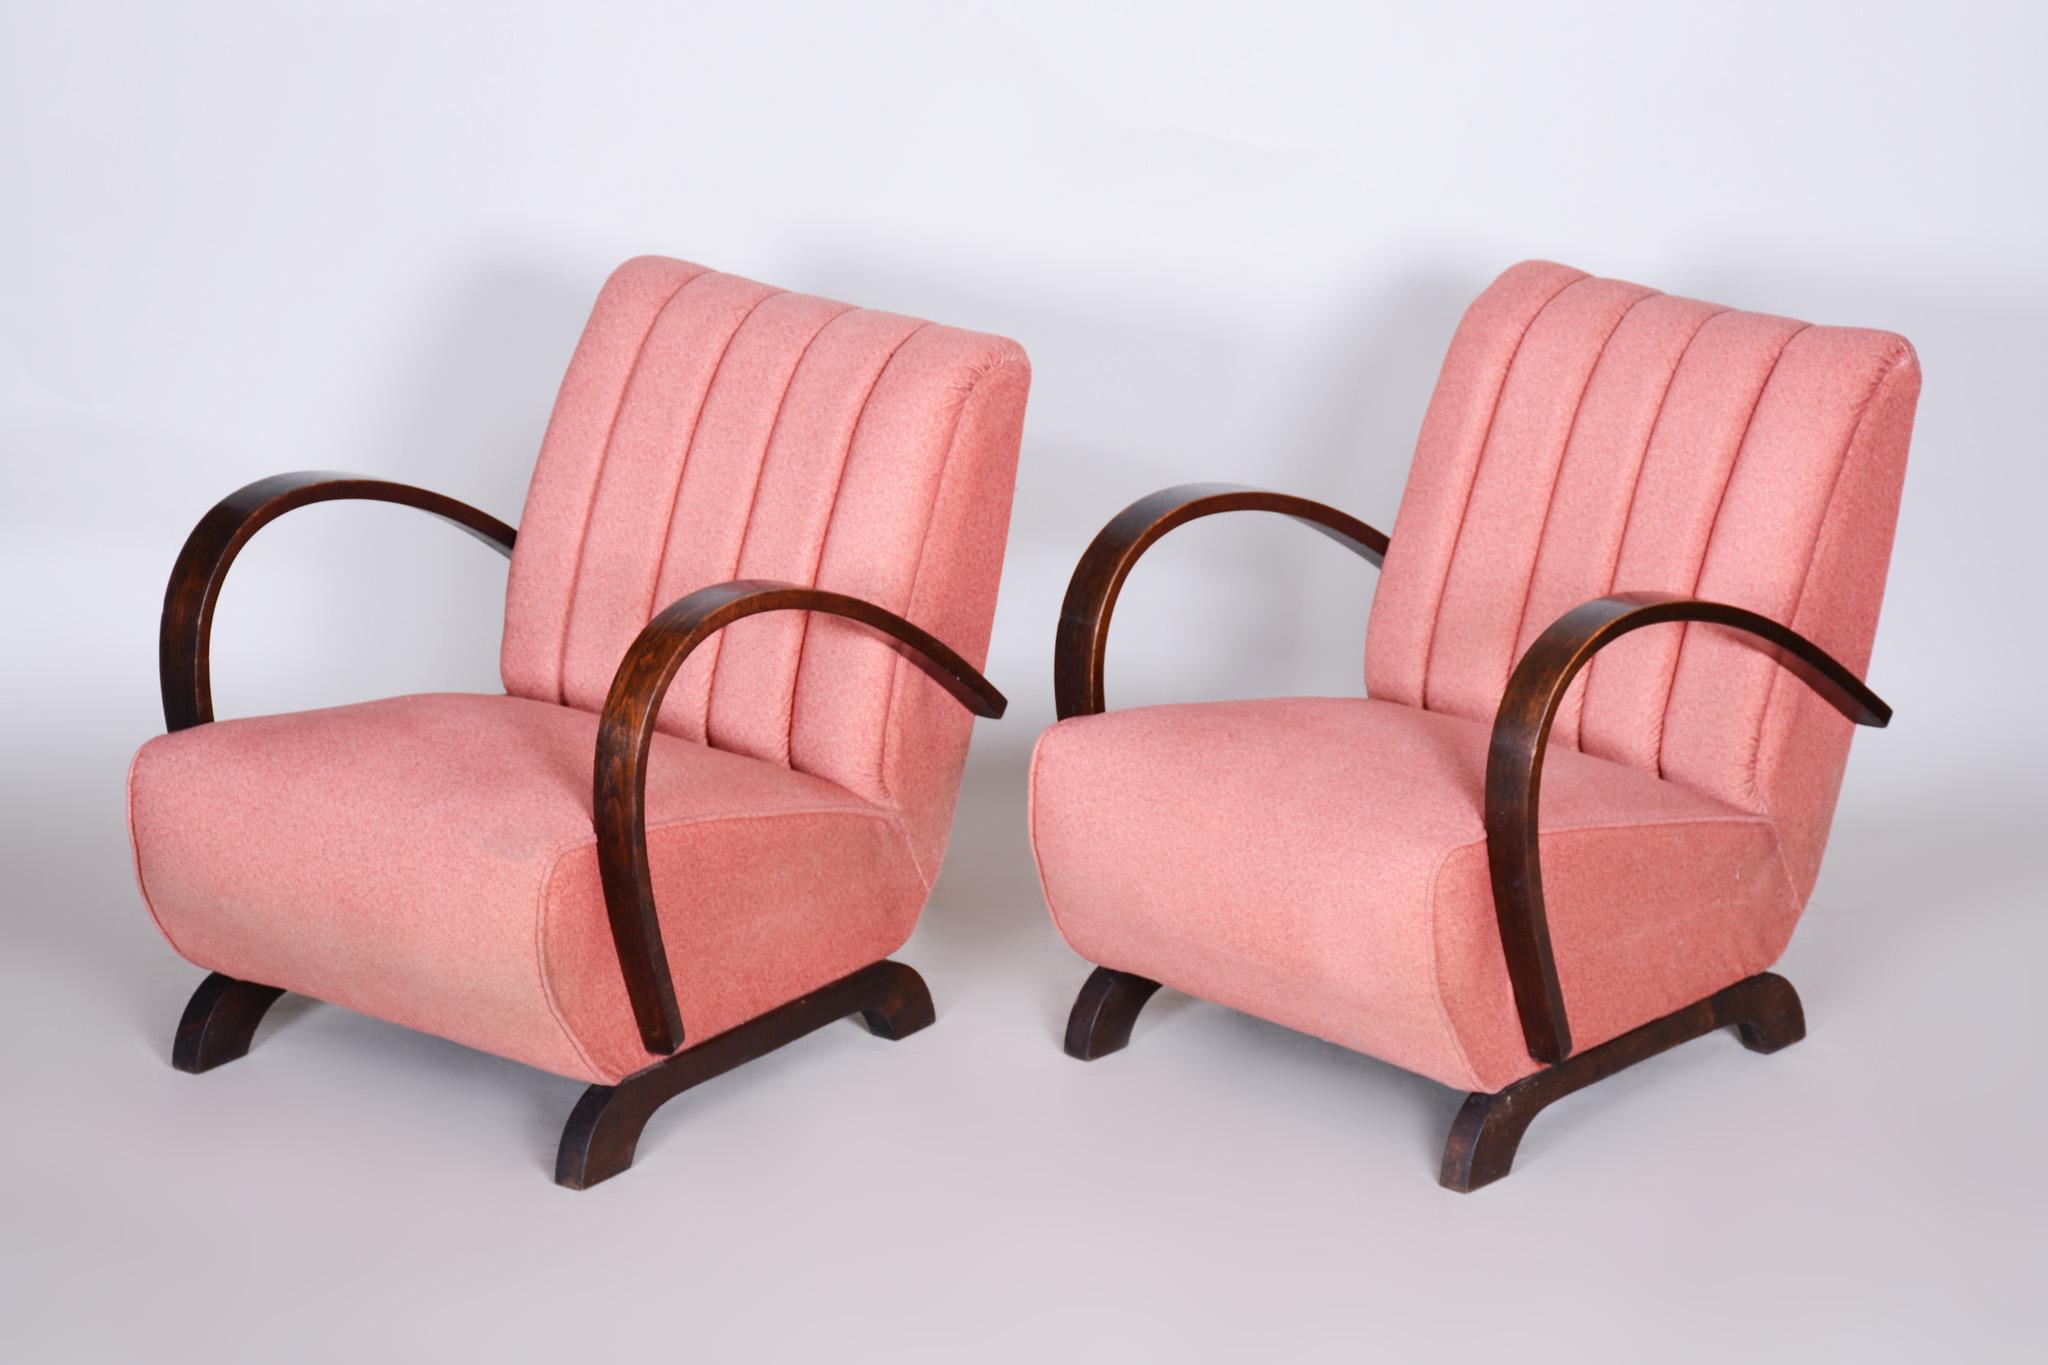 Pink Fabric Armchair Made in Czechia, 1930s, Original Condition, Art Deco Style For Sale 3